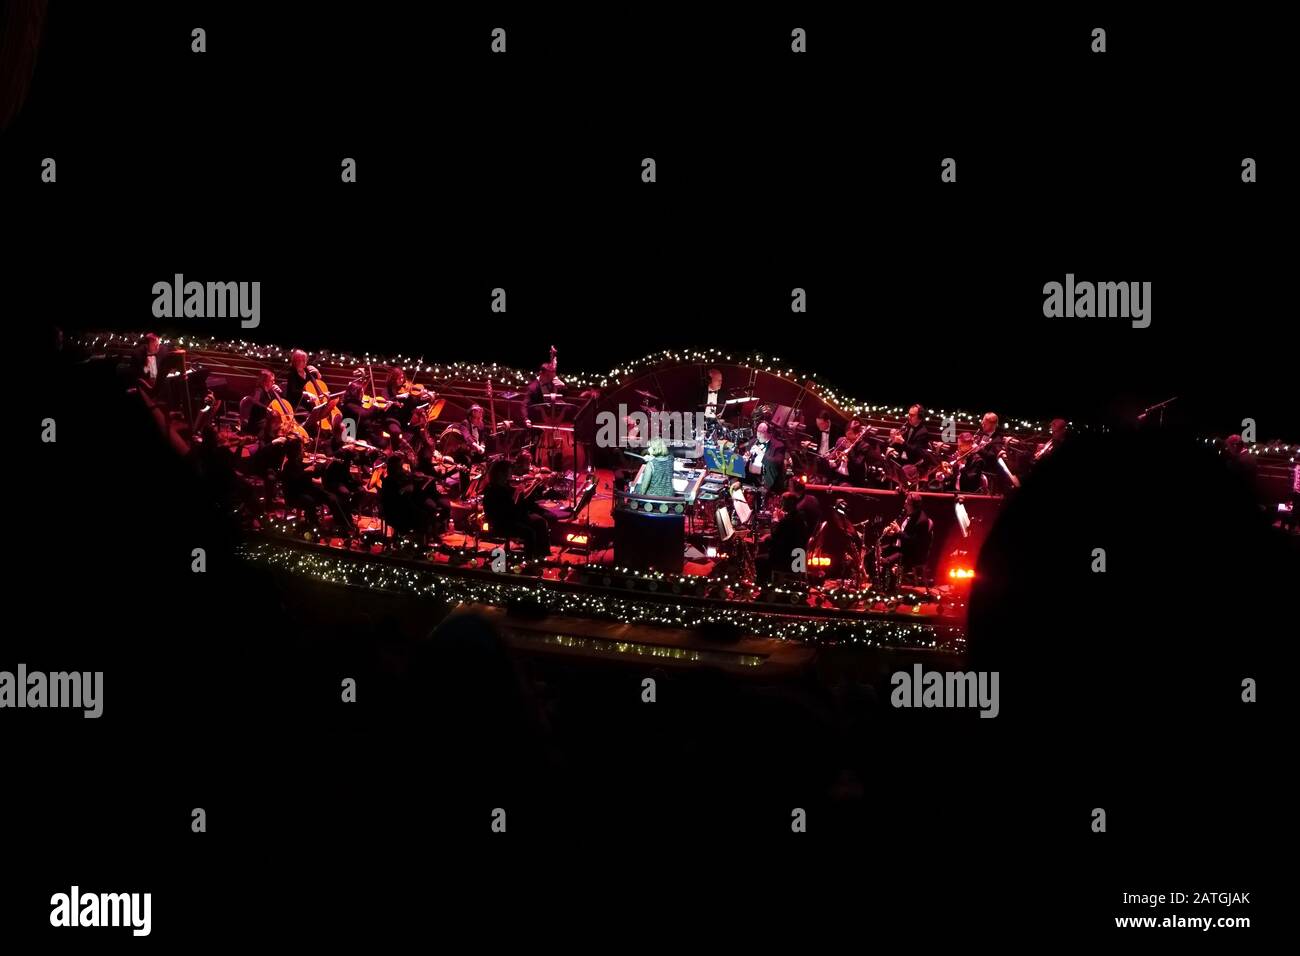 New York, NY / USA - December 30, 2019: Zoomed in view of the orchestra pit during a Rockettes performance at Radio City Music Hall Stock Photo